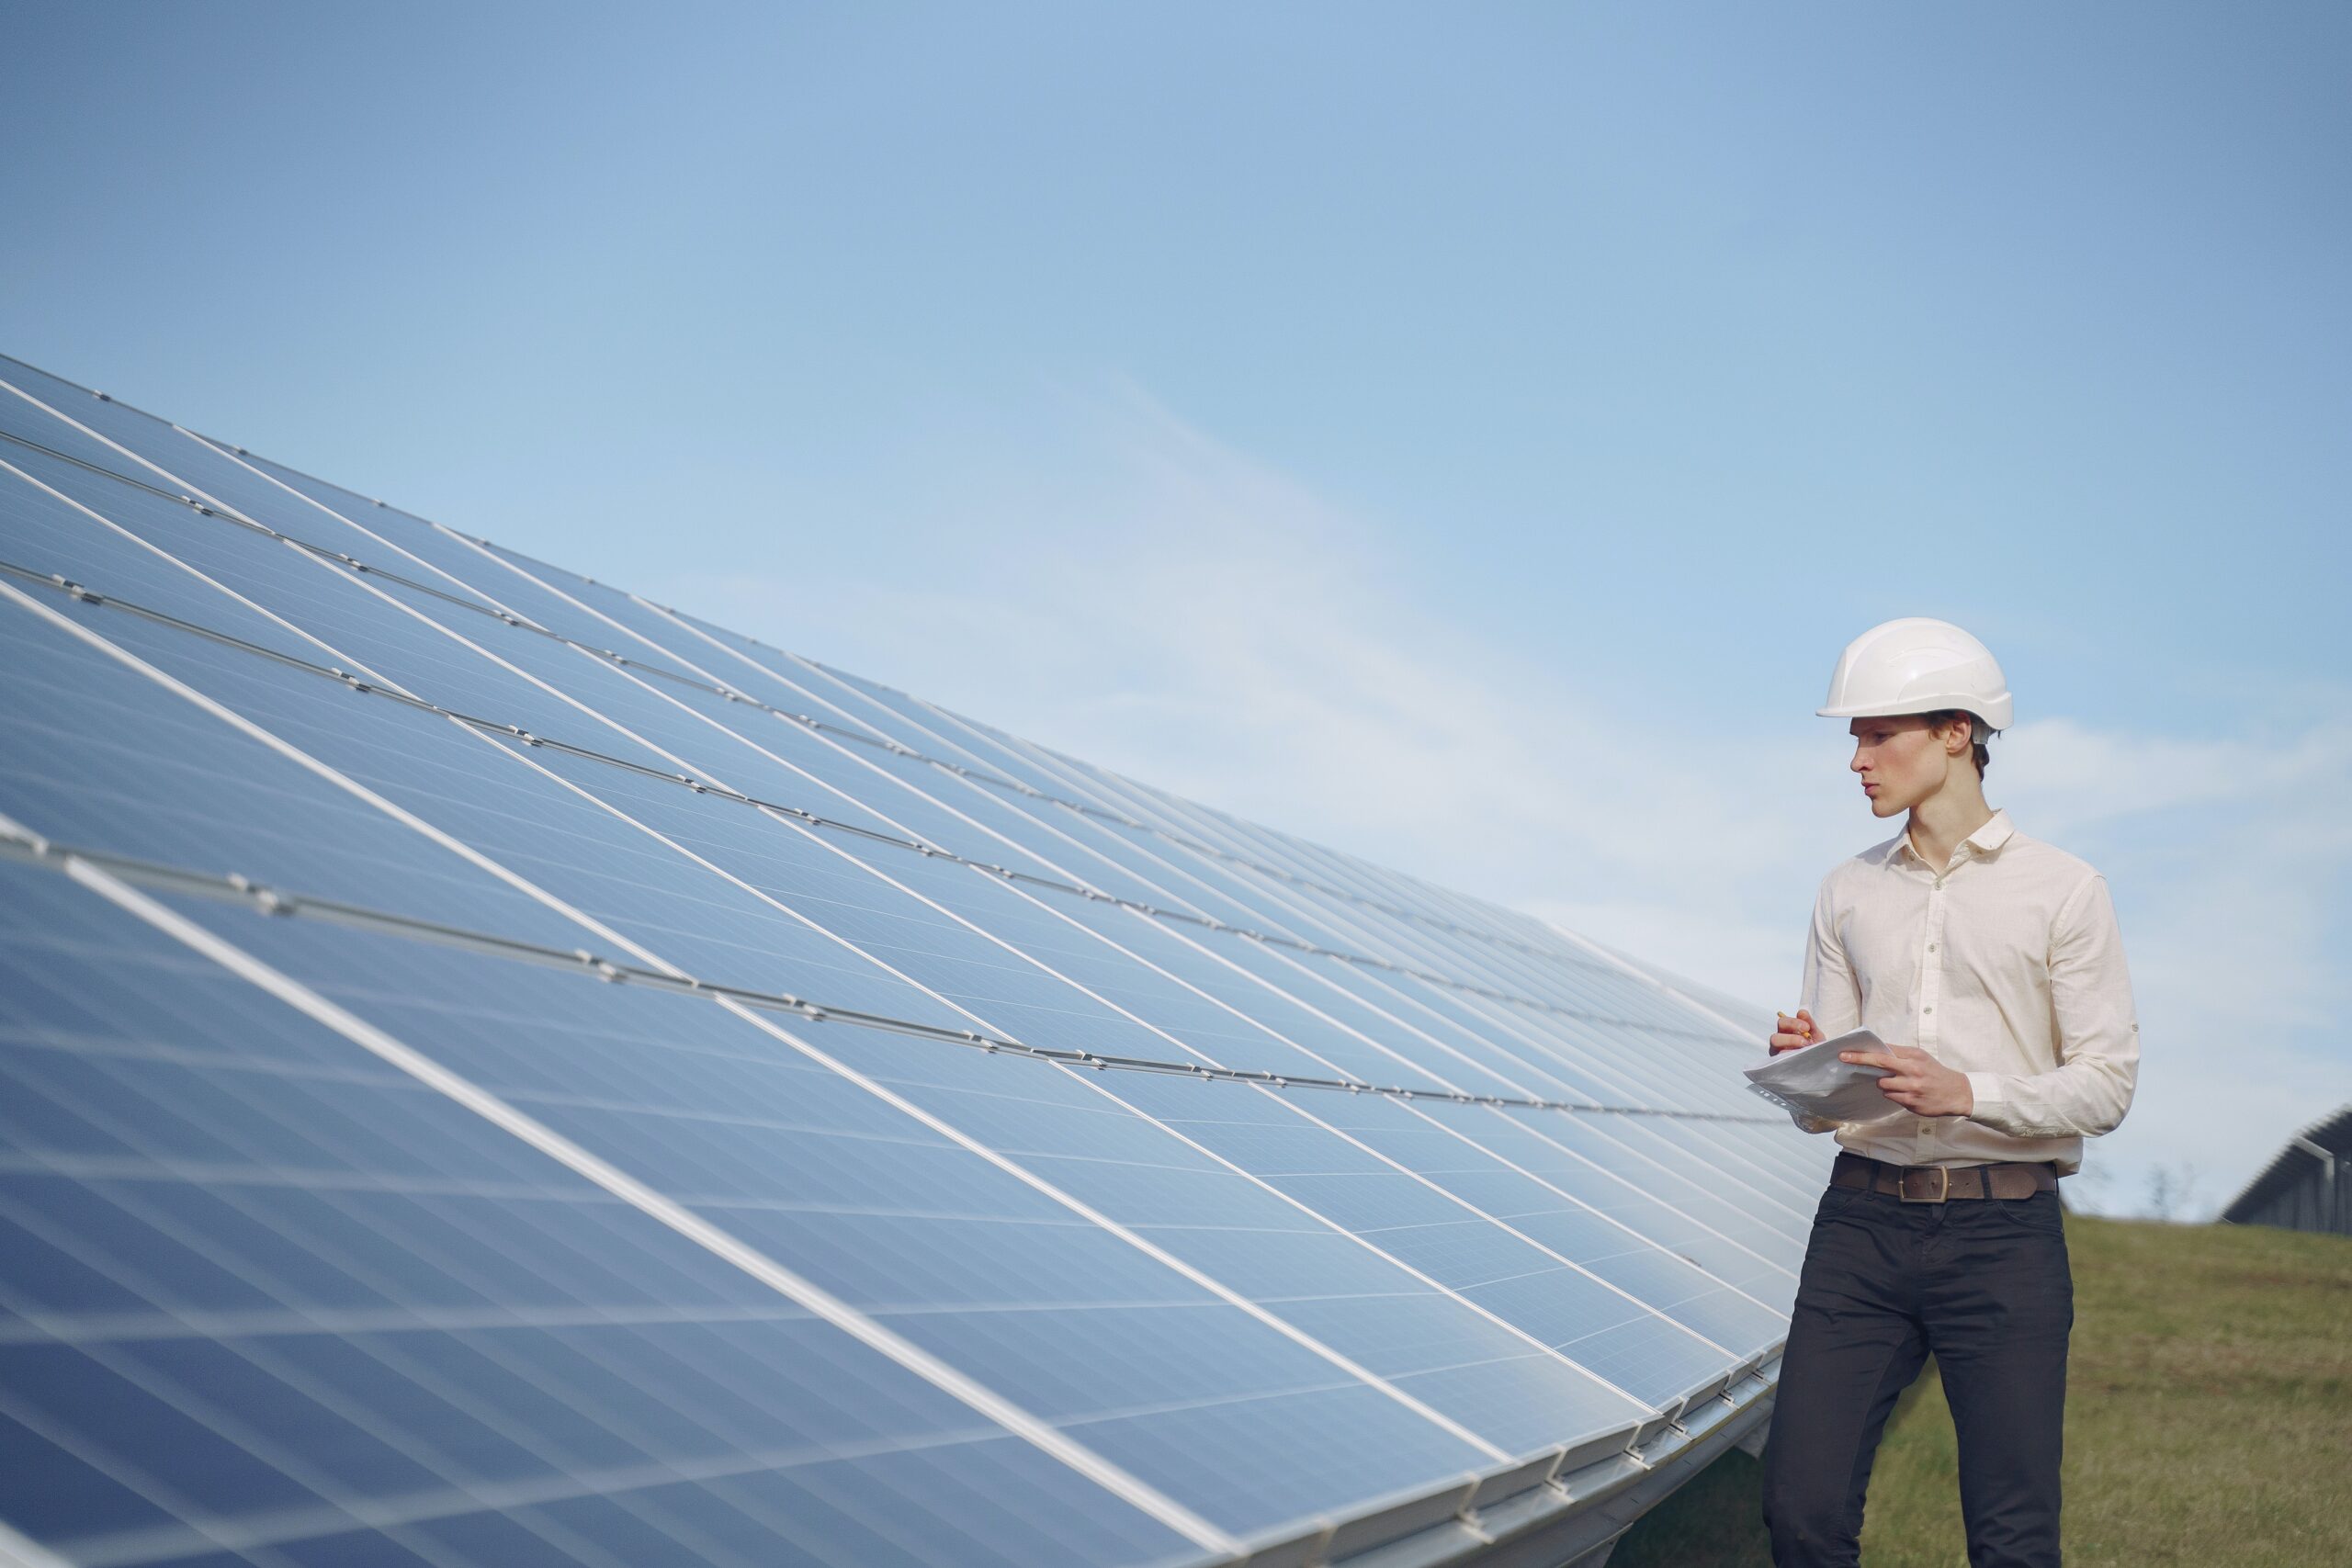 commercial solar system design and installation service Sydney NSW